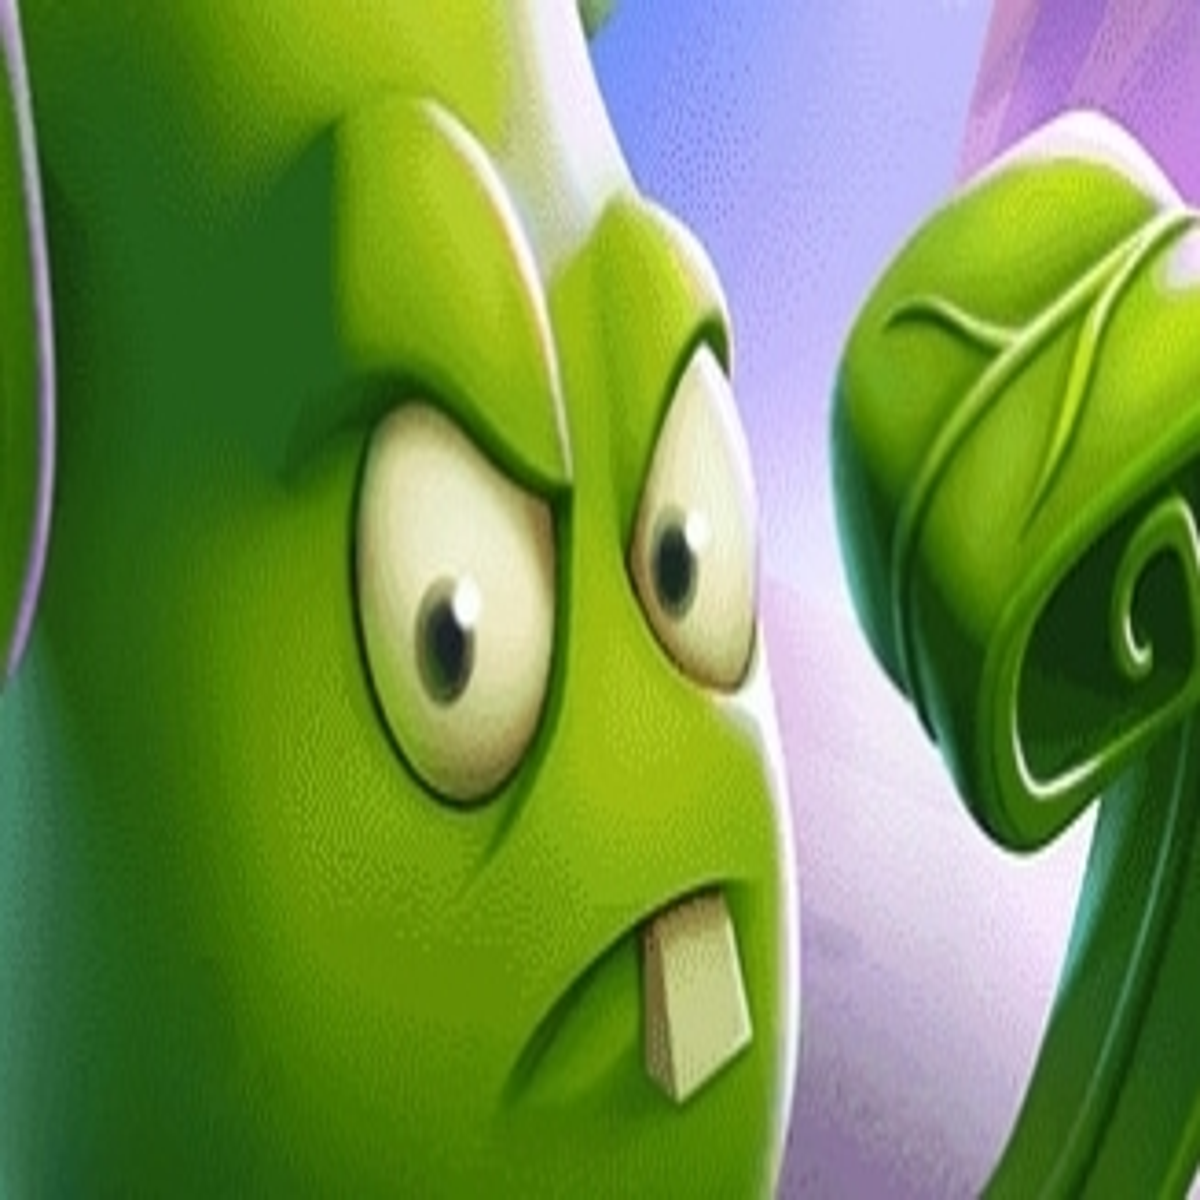 Plants Vs Zombies 3 is now Available, First Soft Launch is in the  Philippines –